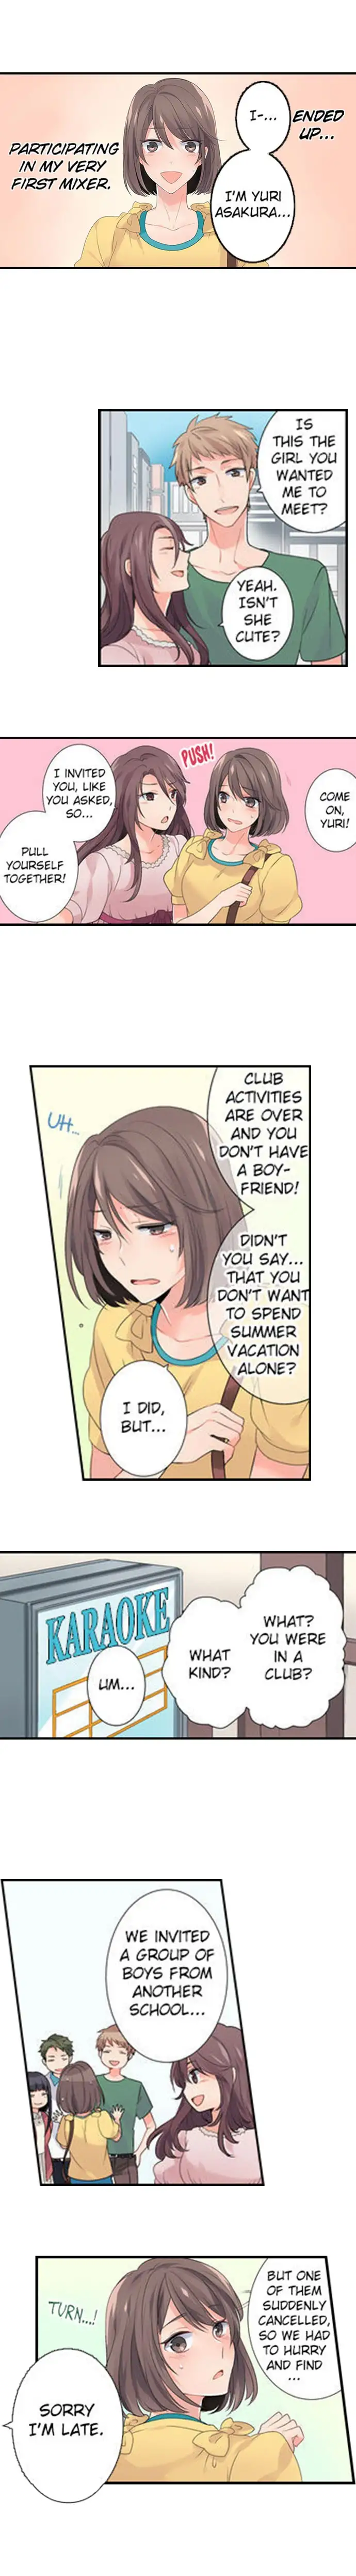 One-Summer Boyfriend -All Our Firsts Together - Chapter 1 Page 3